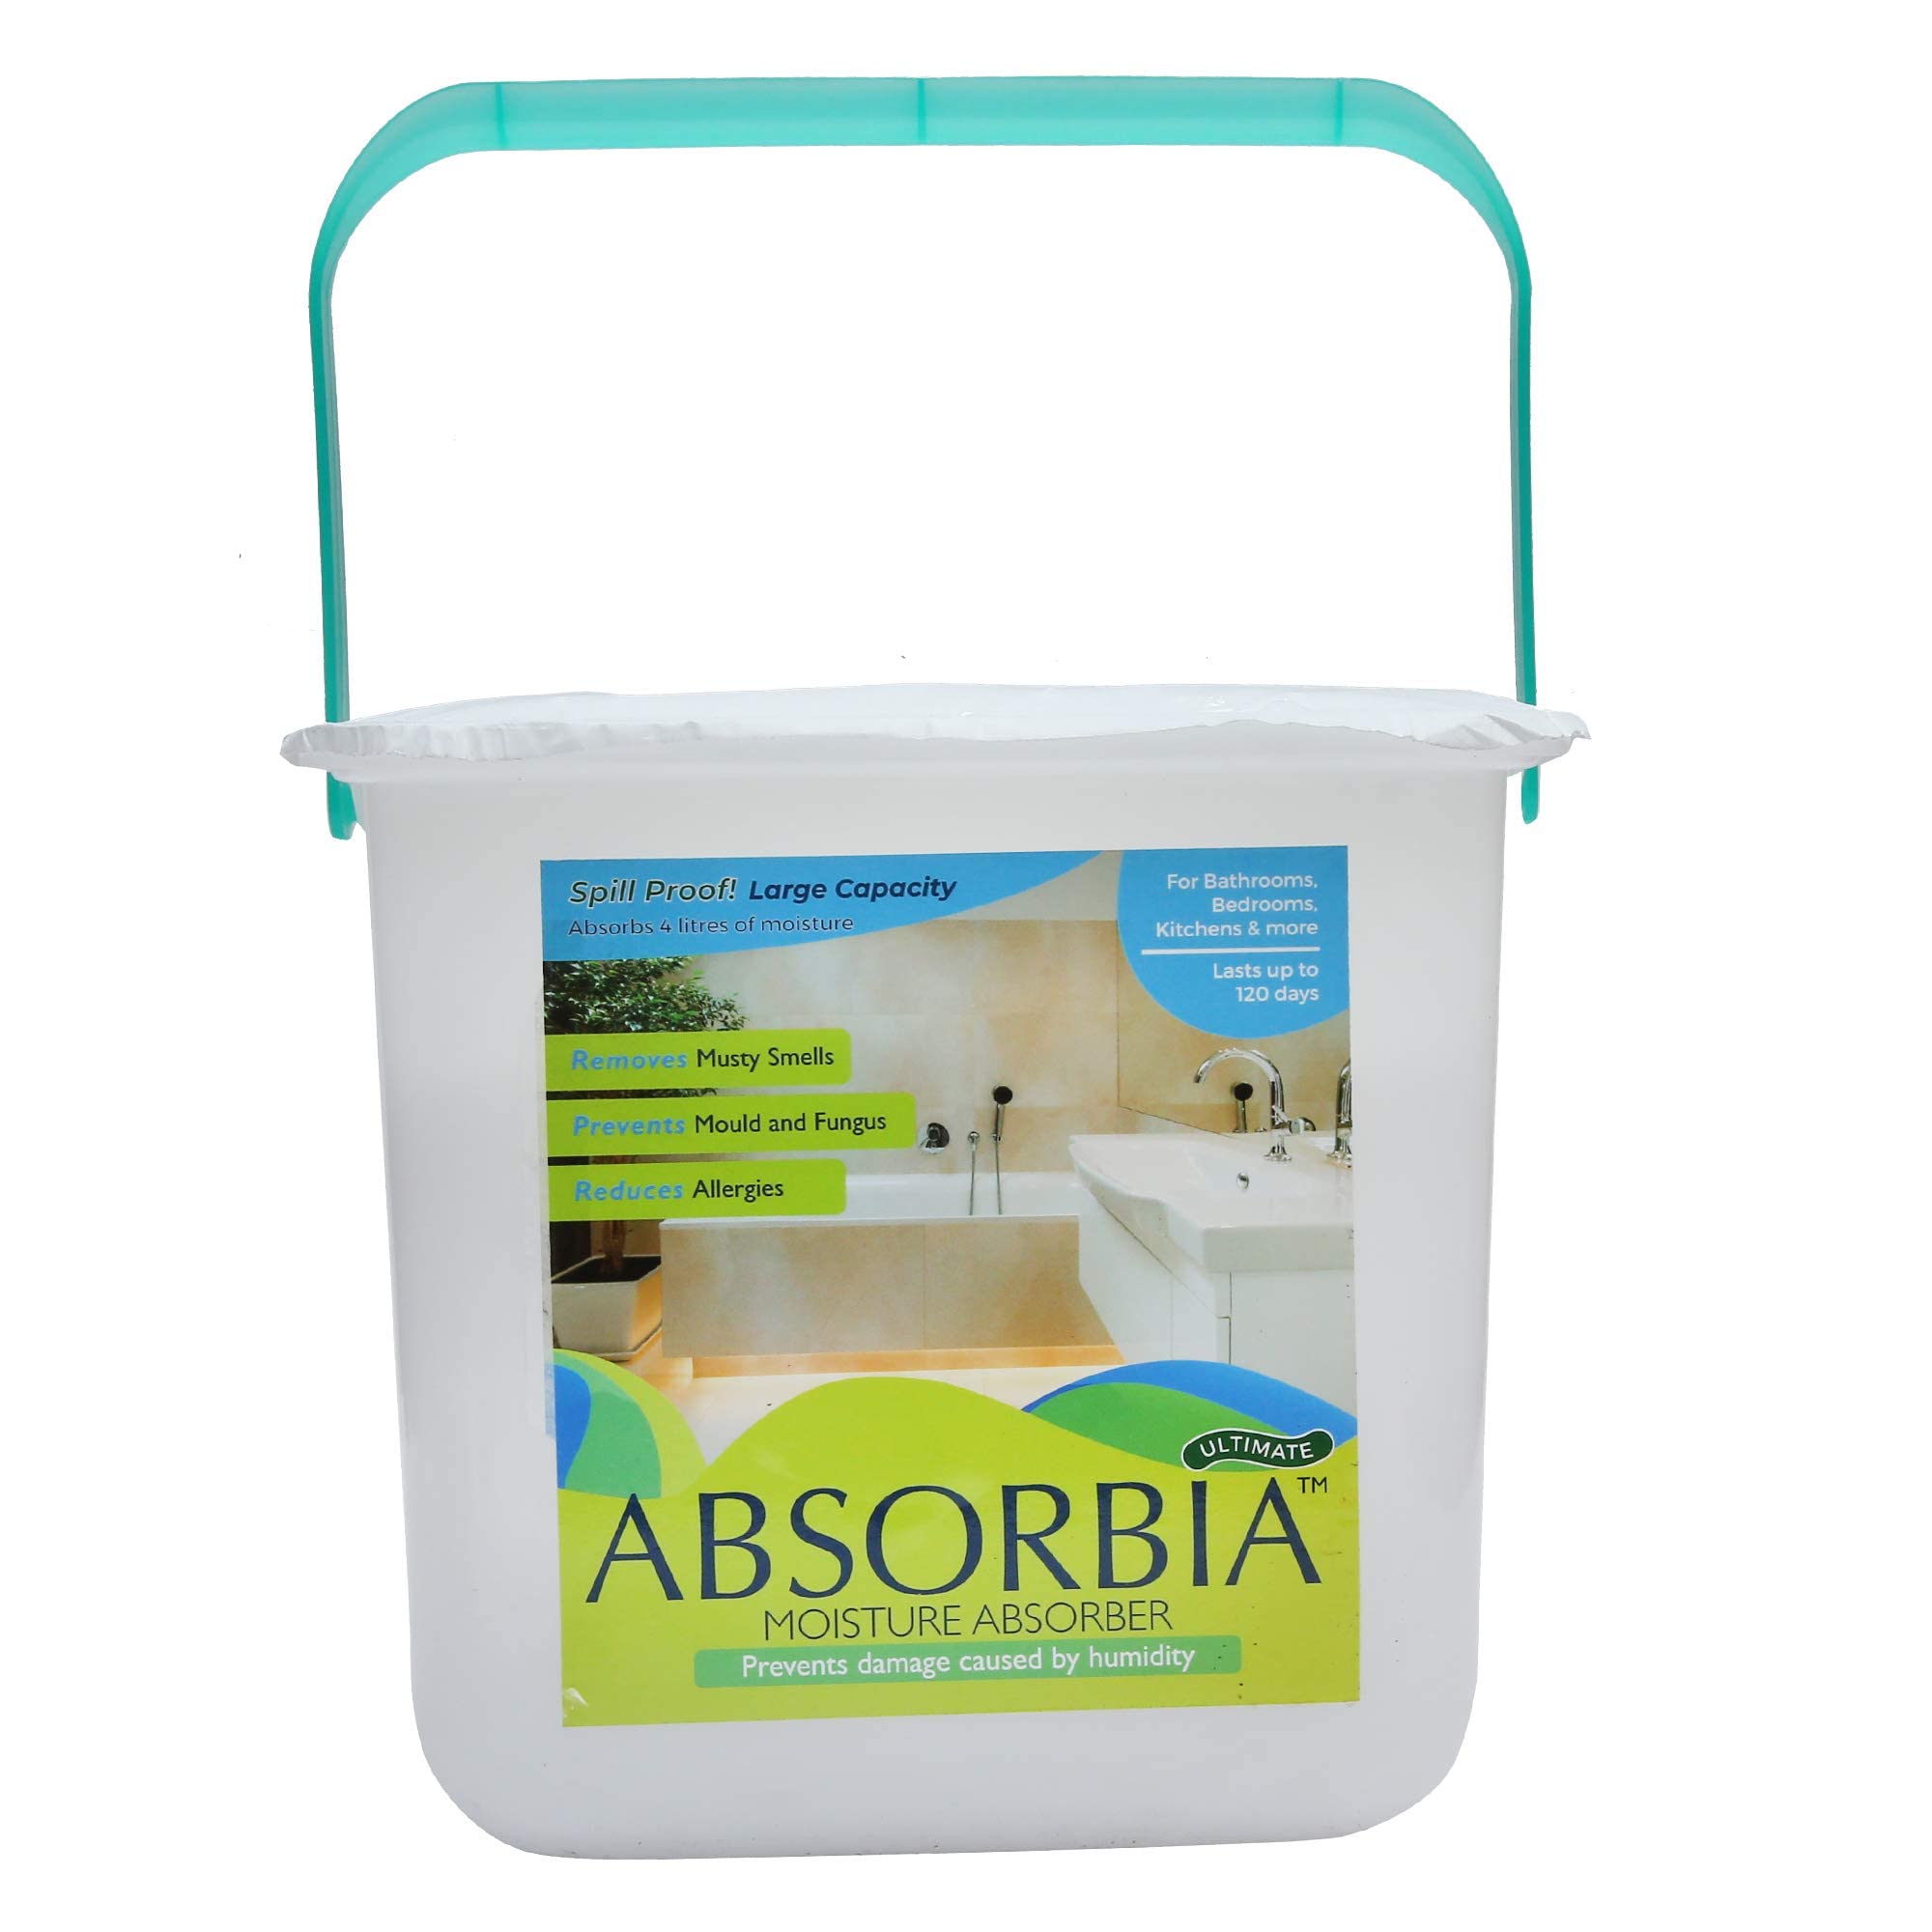 Absorbia Moisture Absorber | Absorbia Ultimate (4L) | Pack of 4 Non-Electric Dehumidier for Large Areas, Bedrooms, Living Room Dining Room| Fights Against Moisture, Mould, Fungus Musty smells…